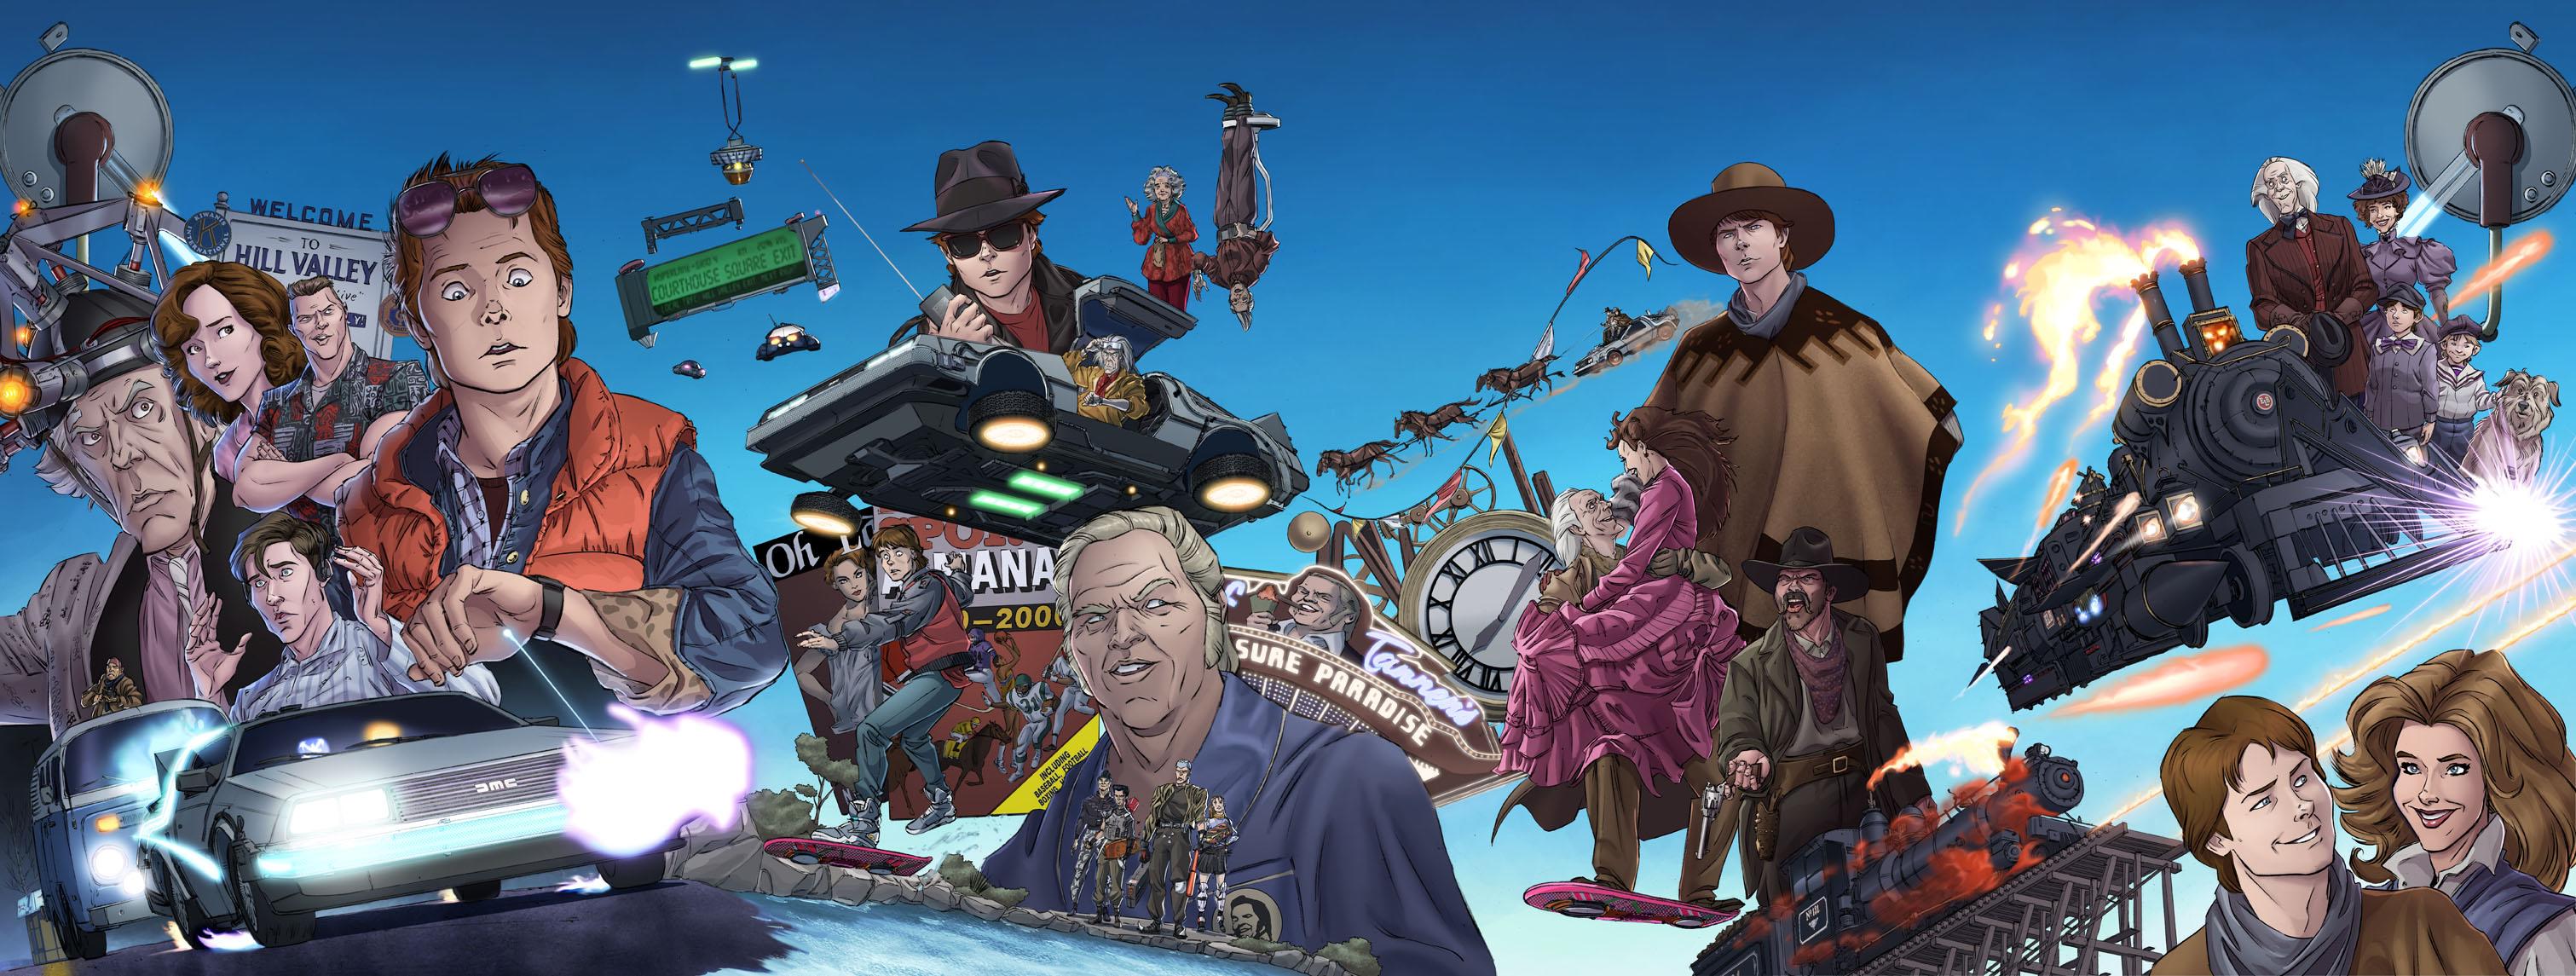 Comics Back To The Future HD Wallpaper | Background Image